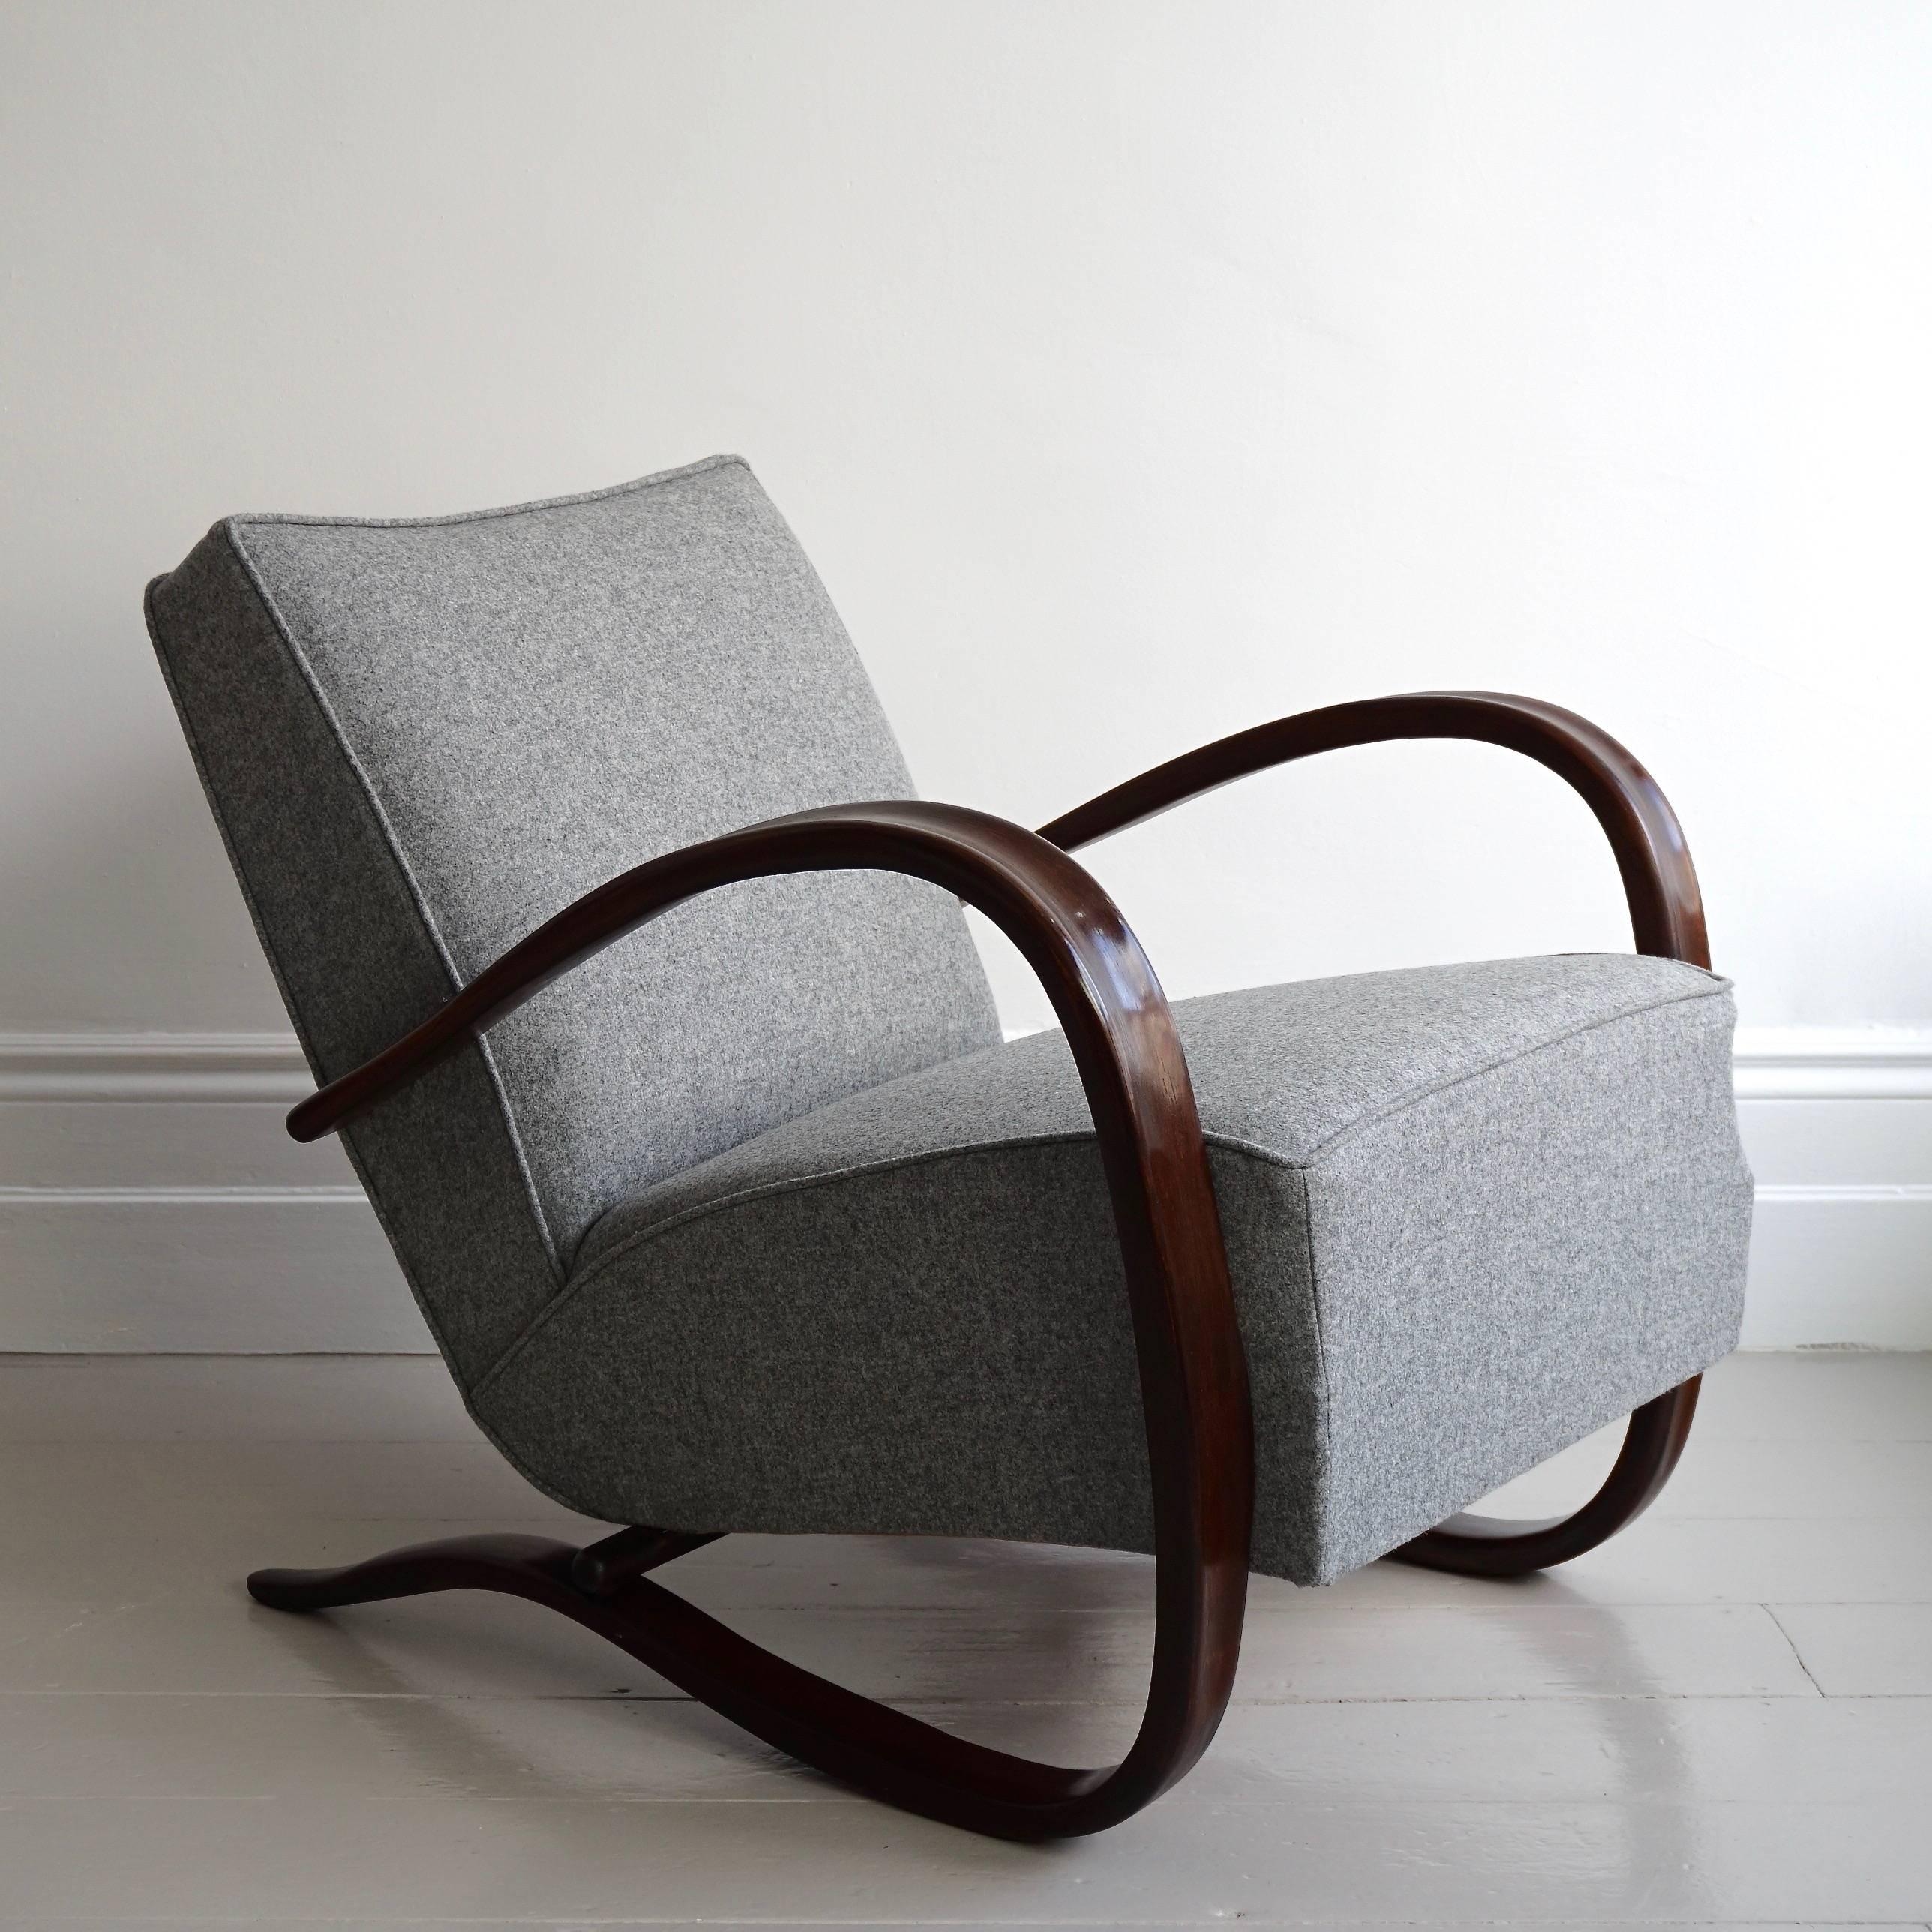 A stunning Czech designed H-269 Jindrich Halabala bentwood lounge chair by renowned German cabinet maker Thonet. This incredible armchair has been beautifully restored, and newly re-upholstered in a stunning Abraham Moon & Sons grey Melton wool.